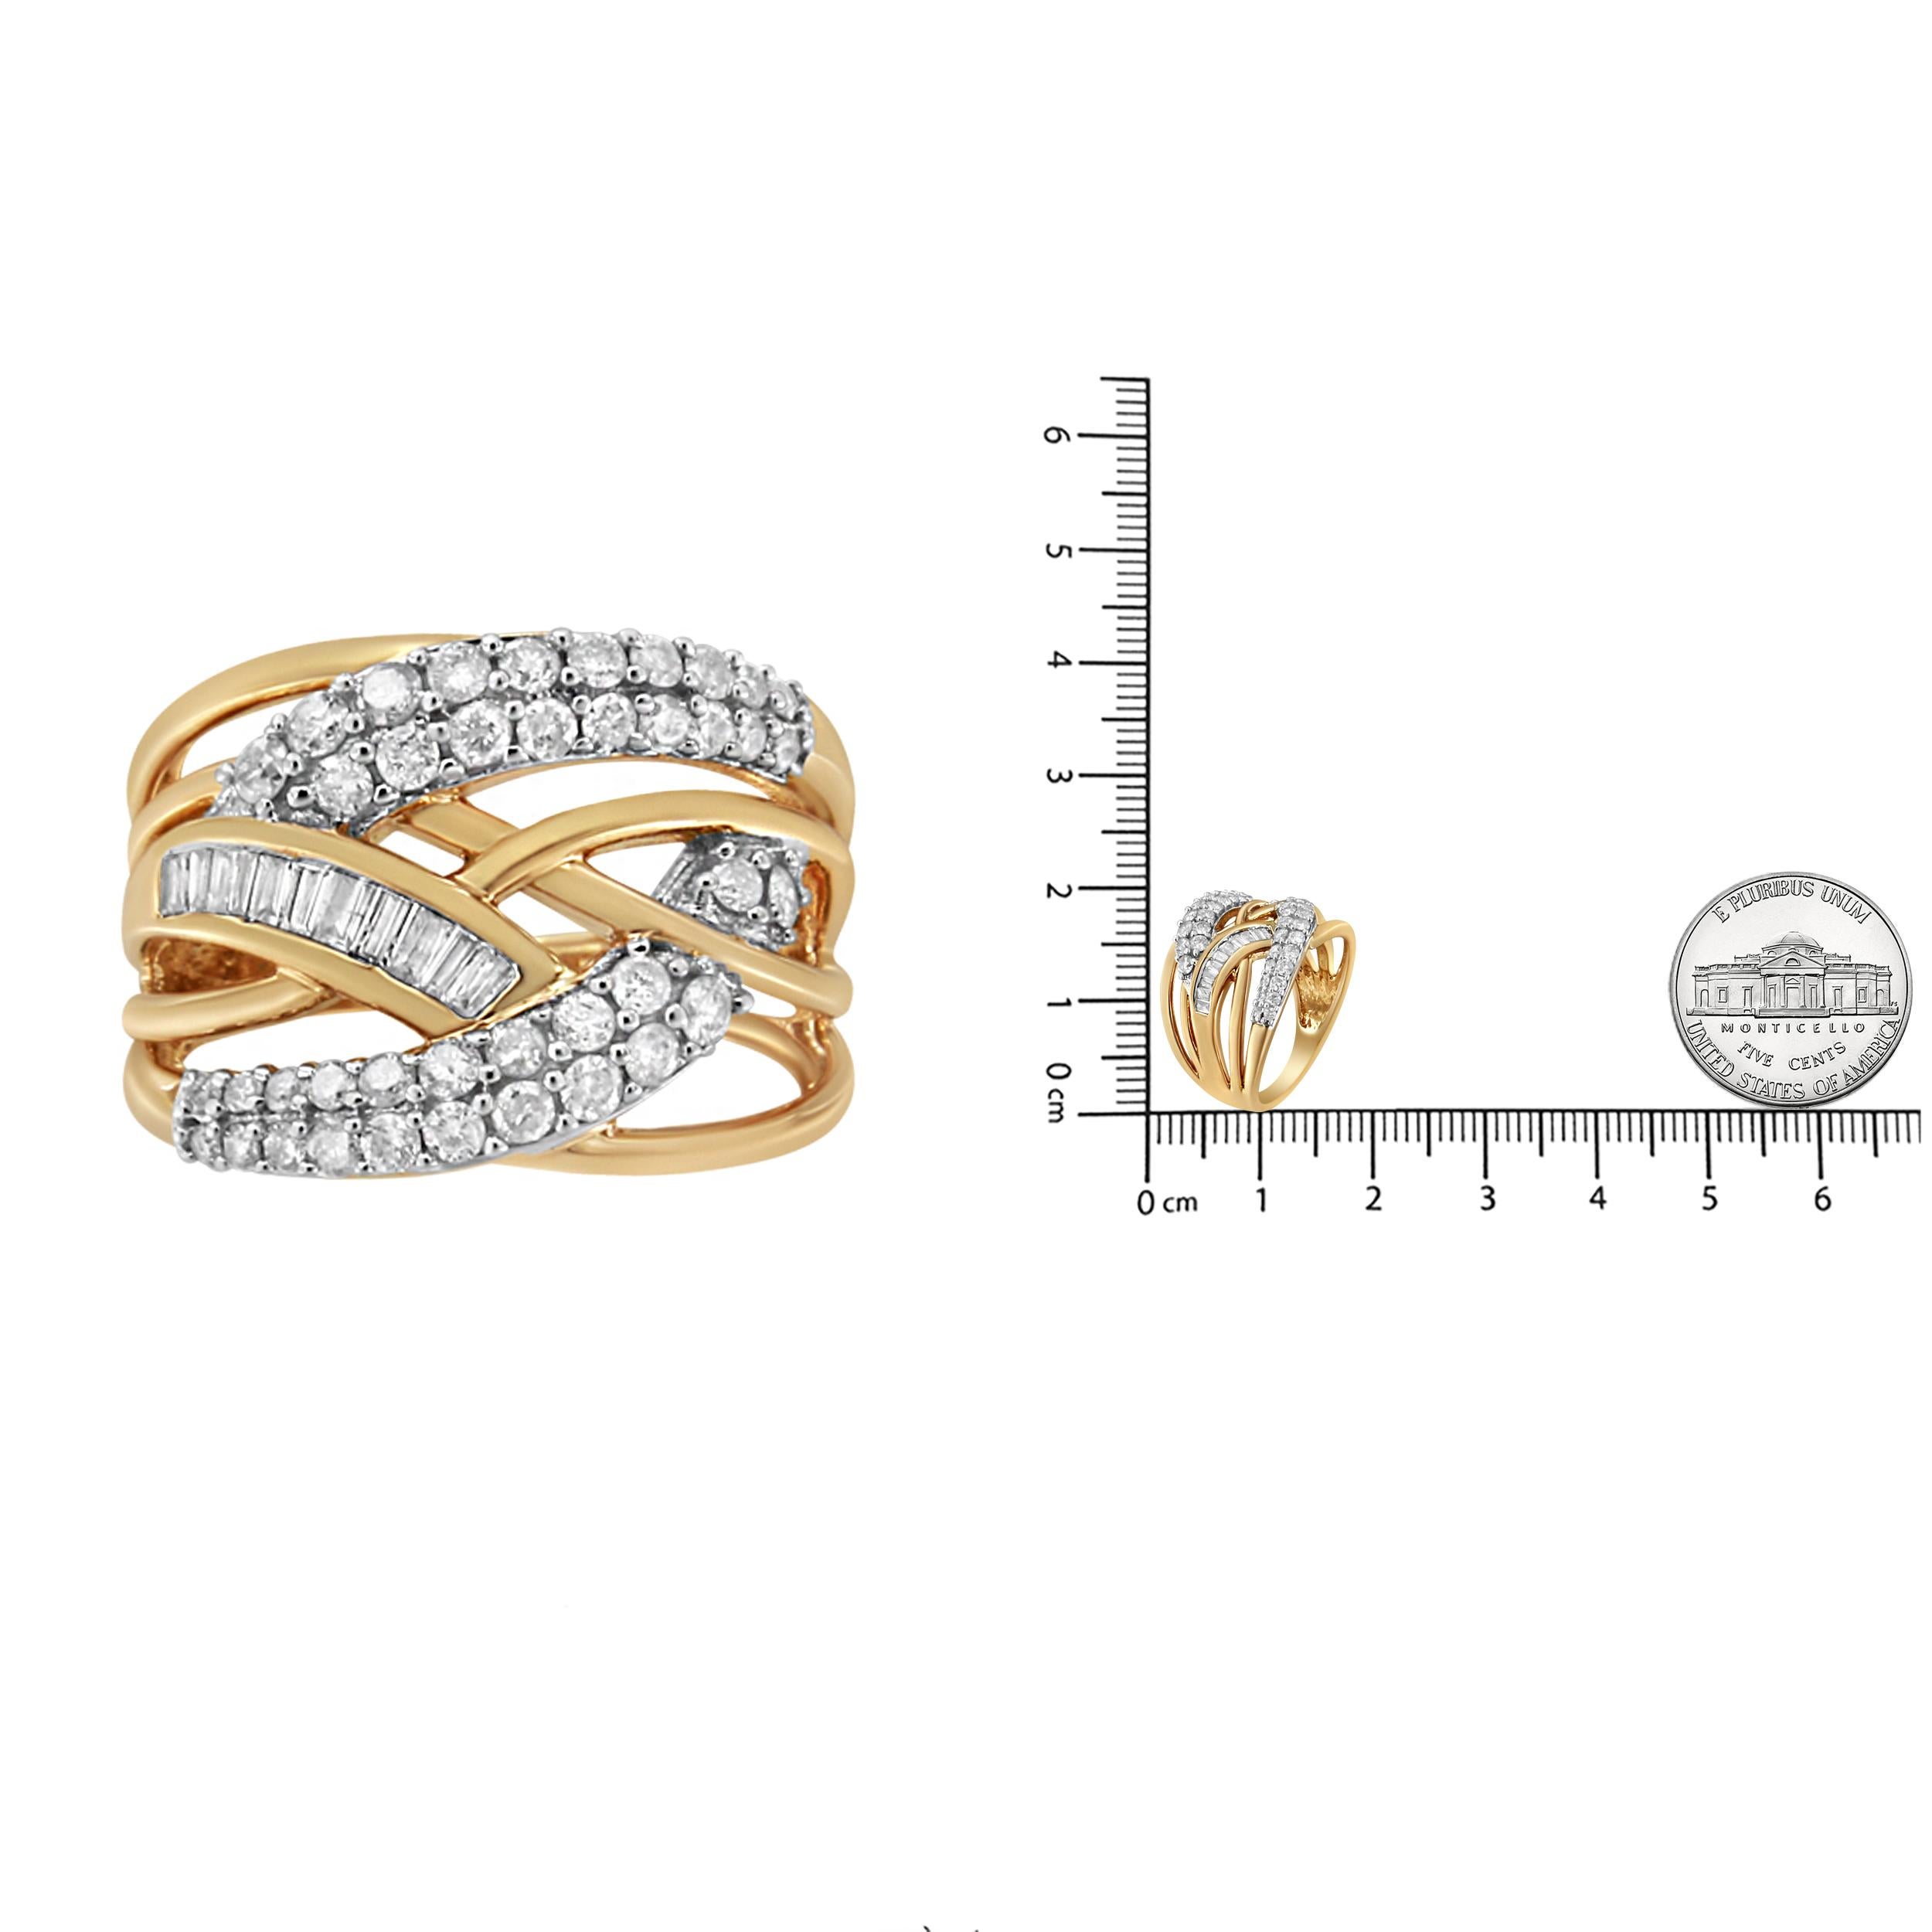 For Sale:  10K Yellow and White Gold 1.0 Carat Diamond Multirow Interwoven Cocktail Ring 6